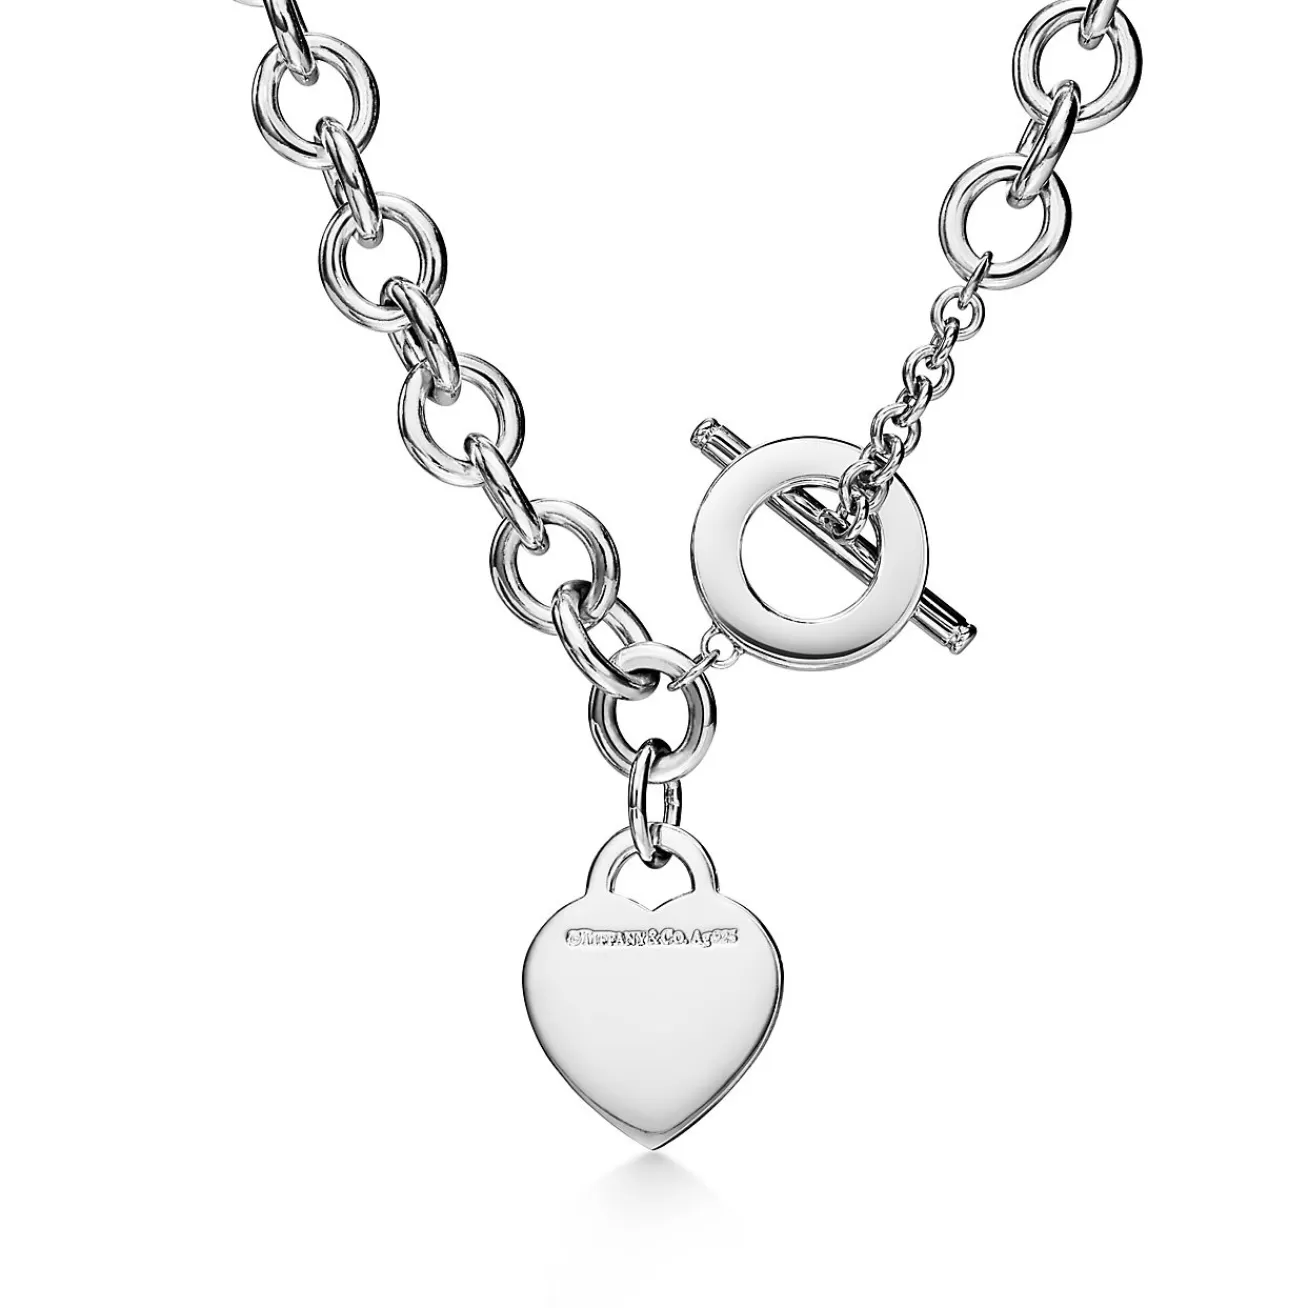 Tiffany & Co. Return to Tiffany® Heart Tag Necklace in Silver with a Diamond, Medium | ^ Necklaces & Pendants | Gifts for Her